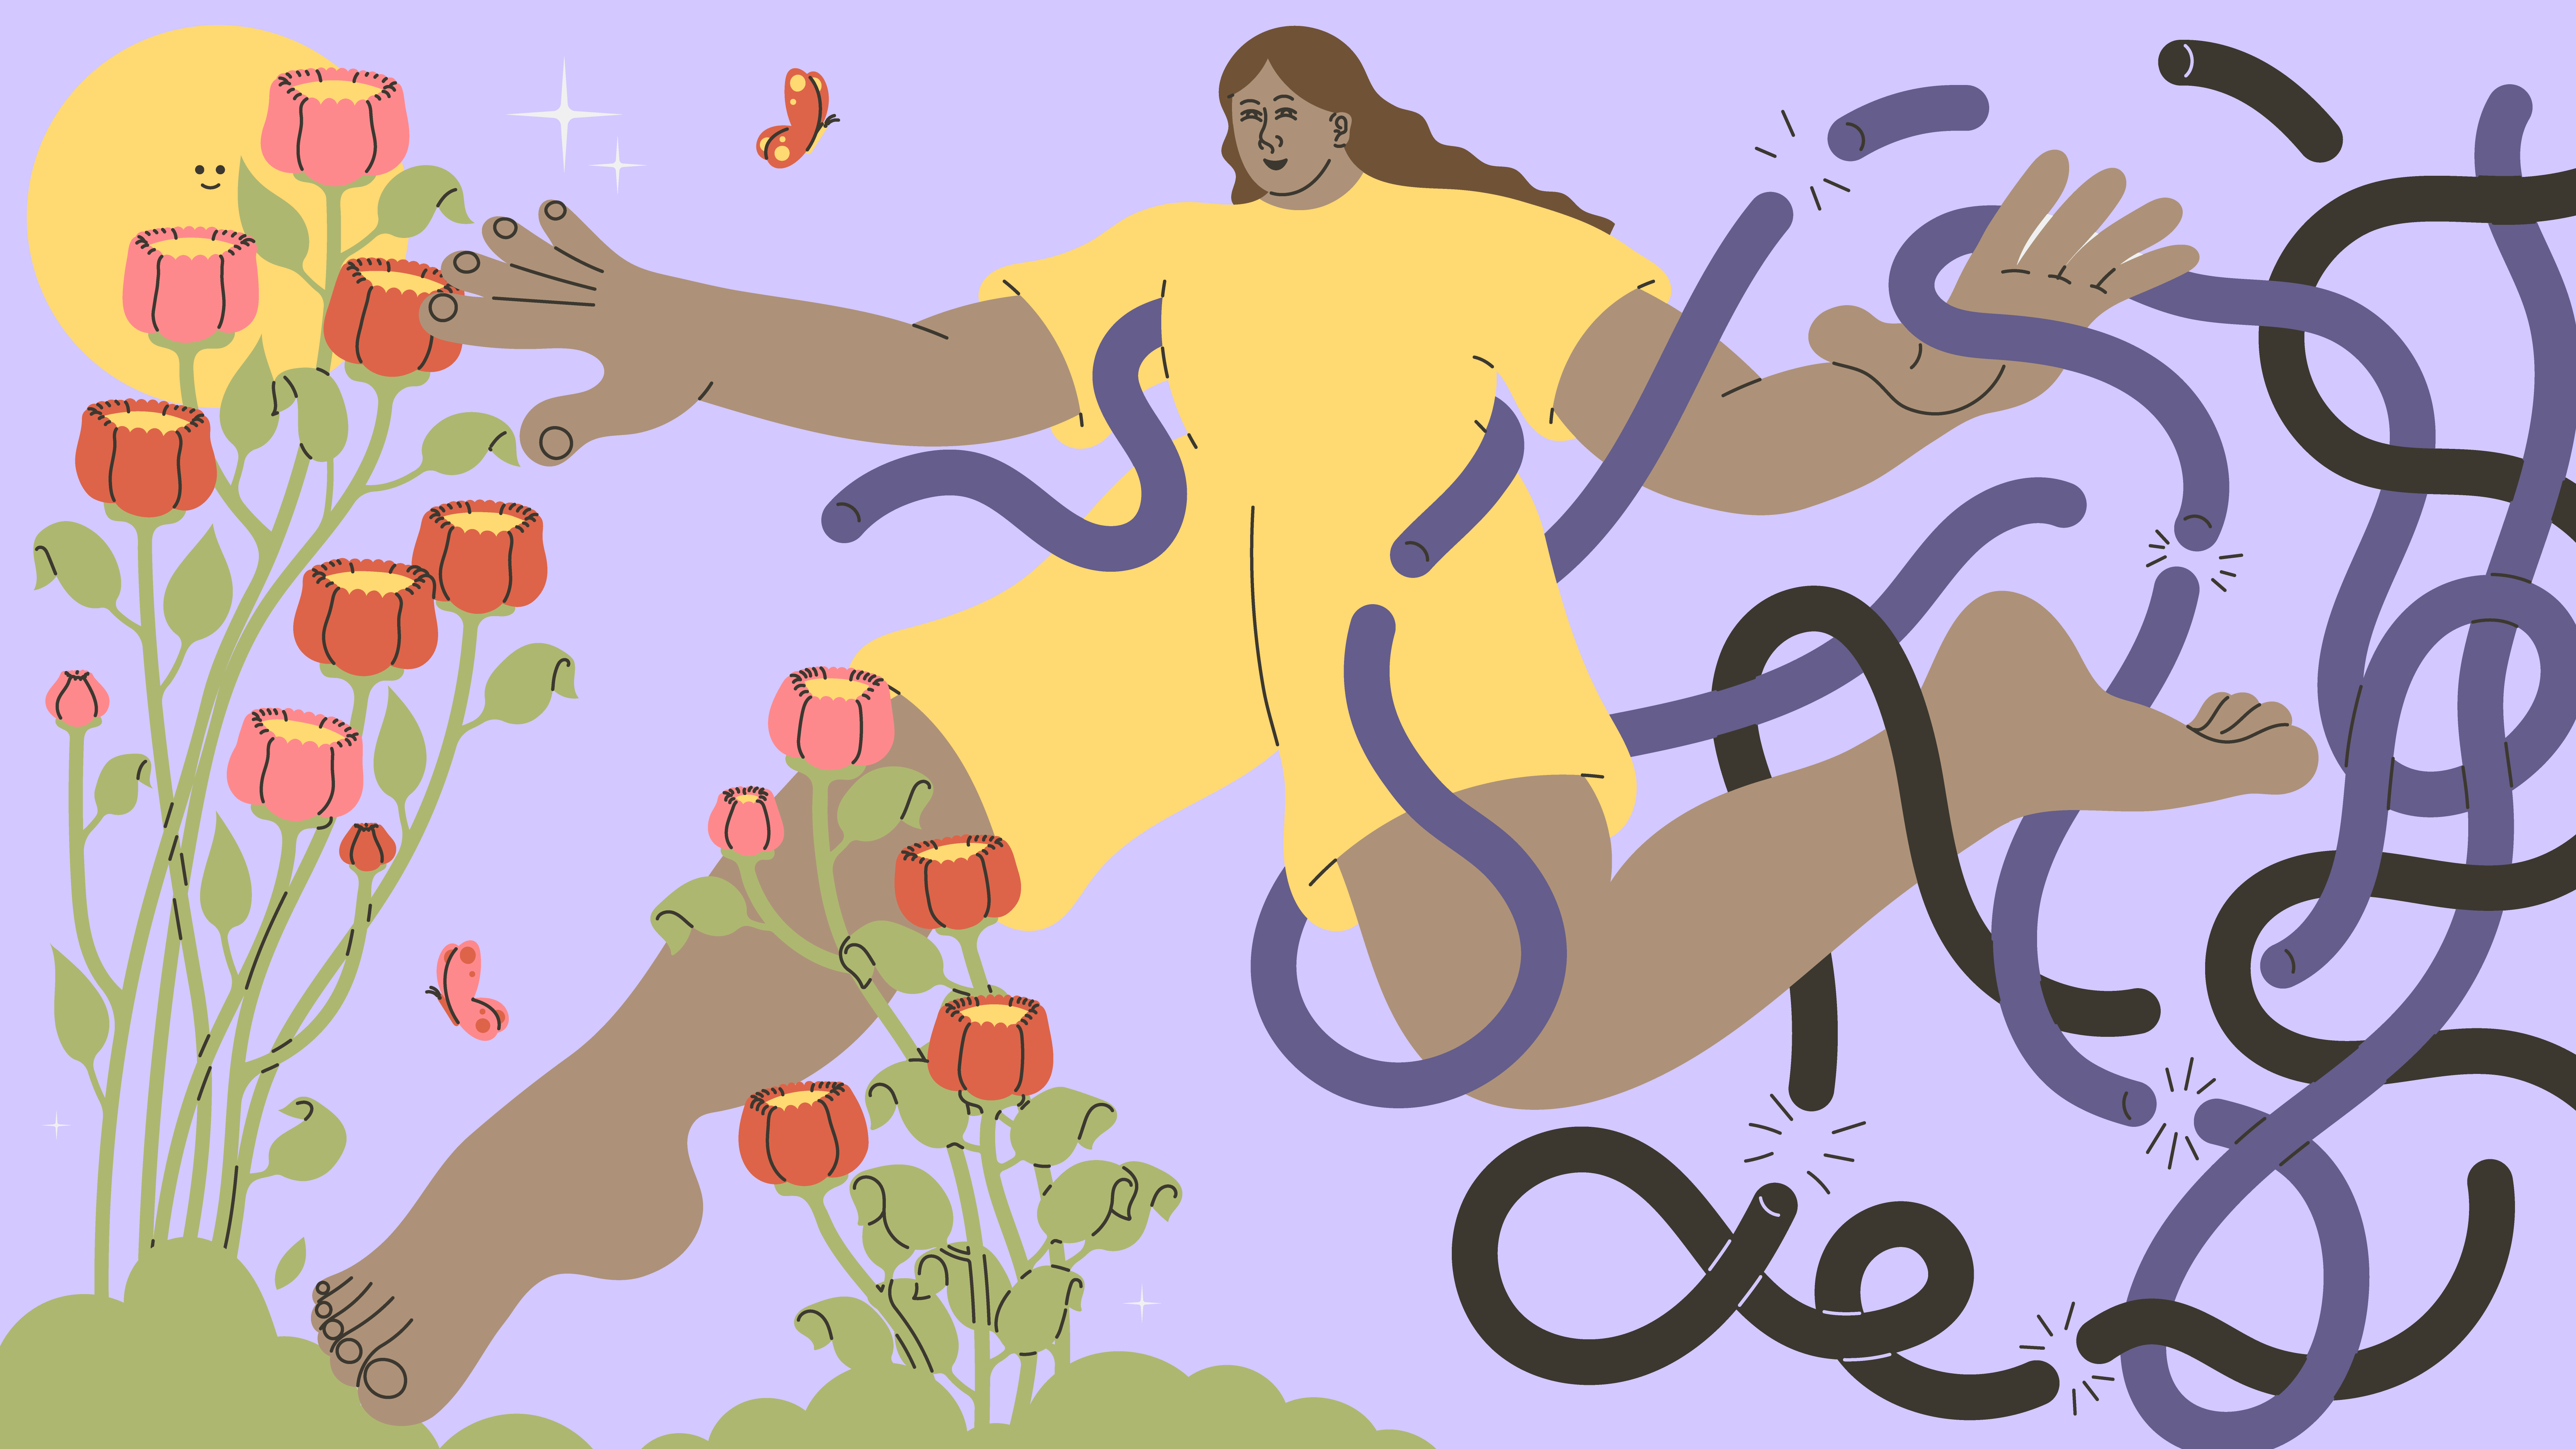 Illustration of person breaking free from dark tangles and leaping into pink and red flowers